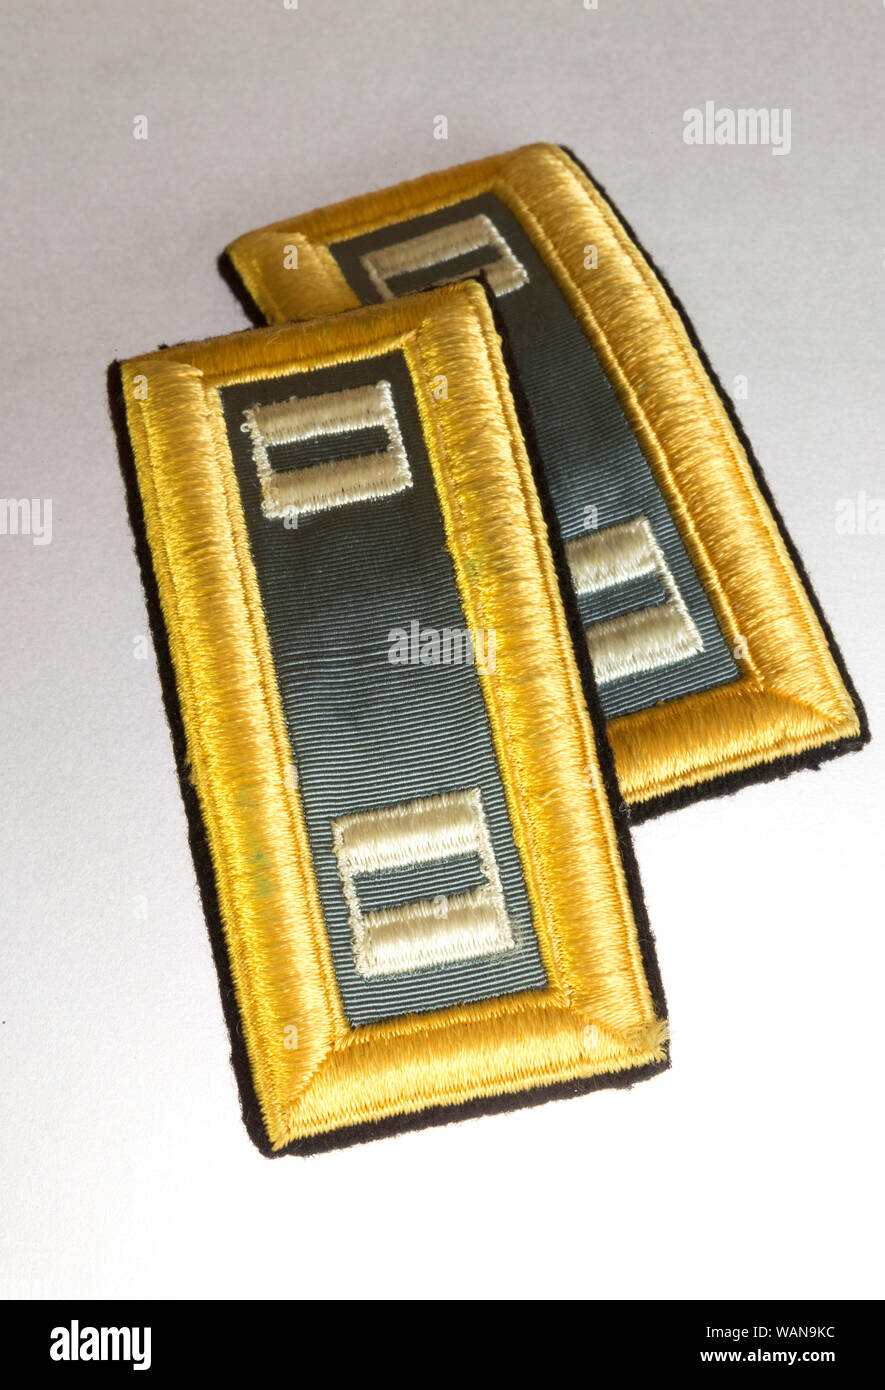 US Army Infantry Captain Shoulder Boards for a Dress Blue Uniform, USA Stock Photo